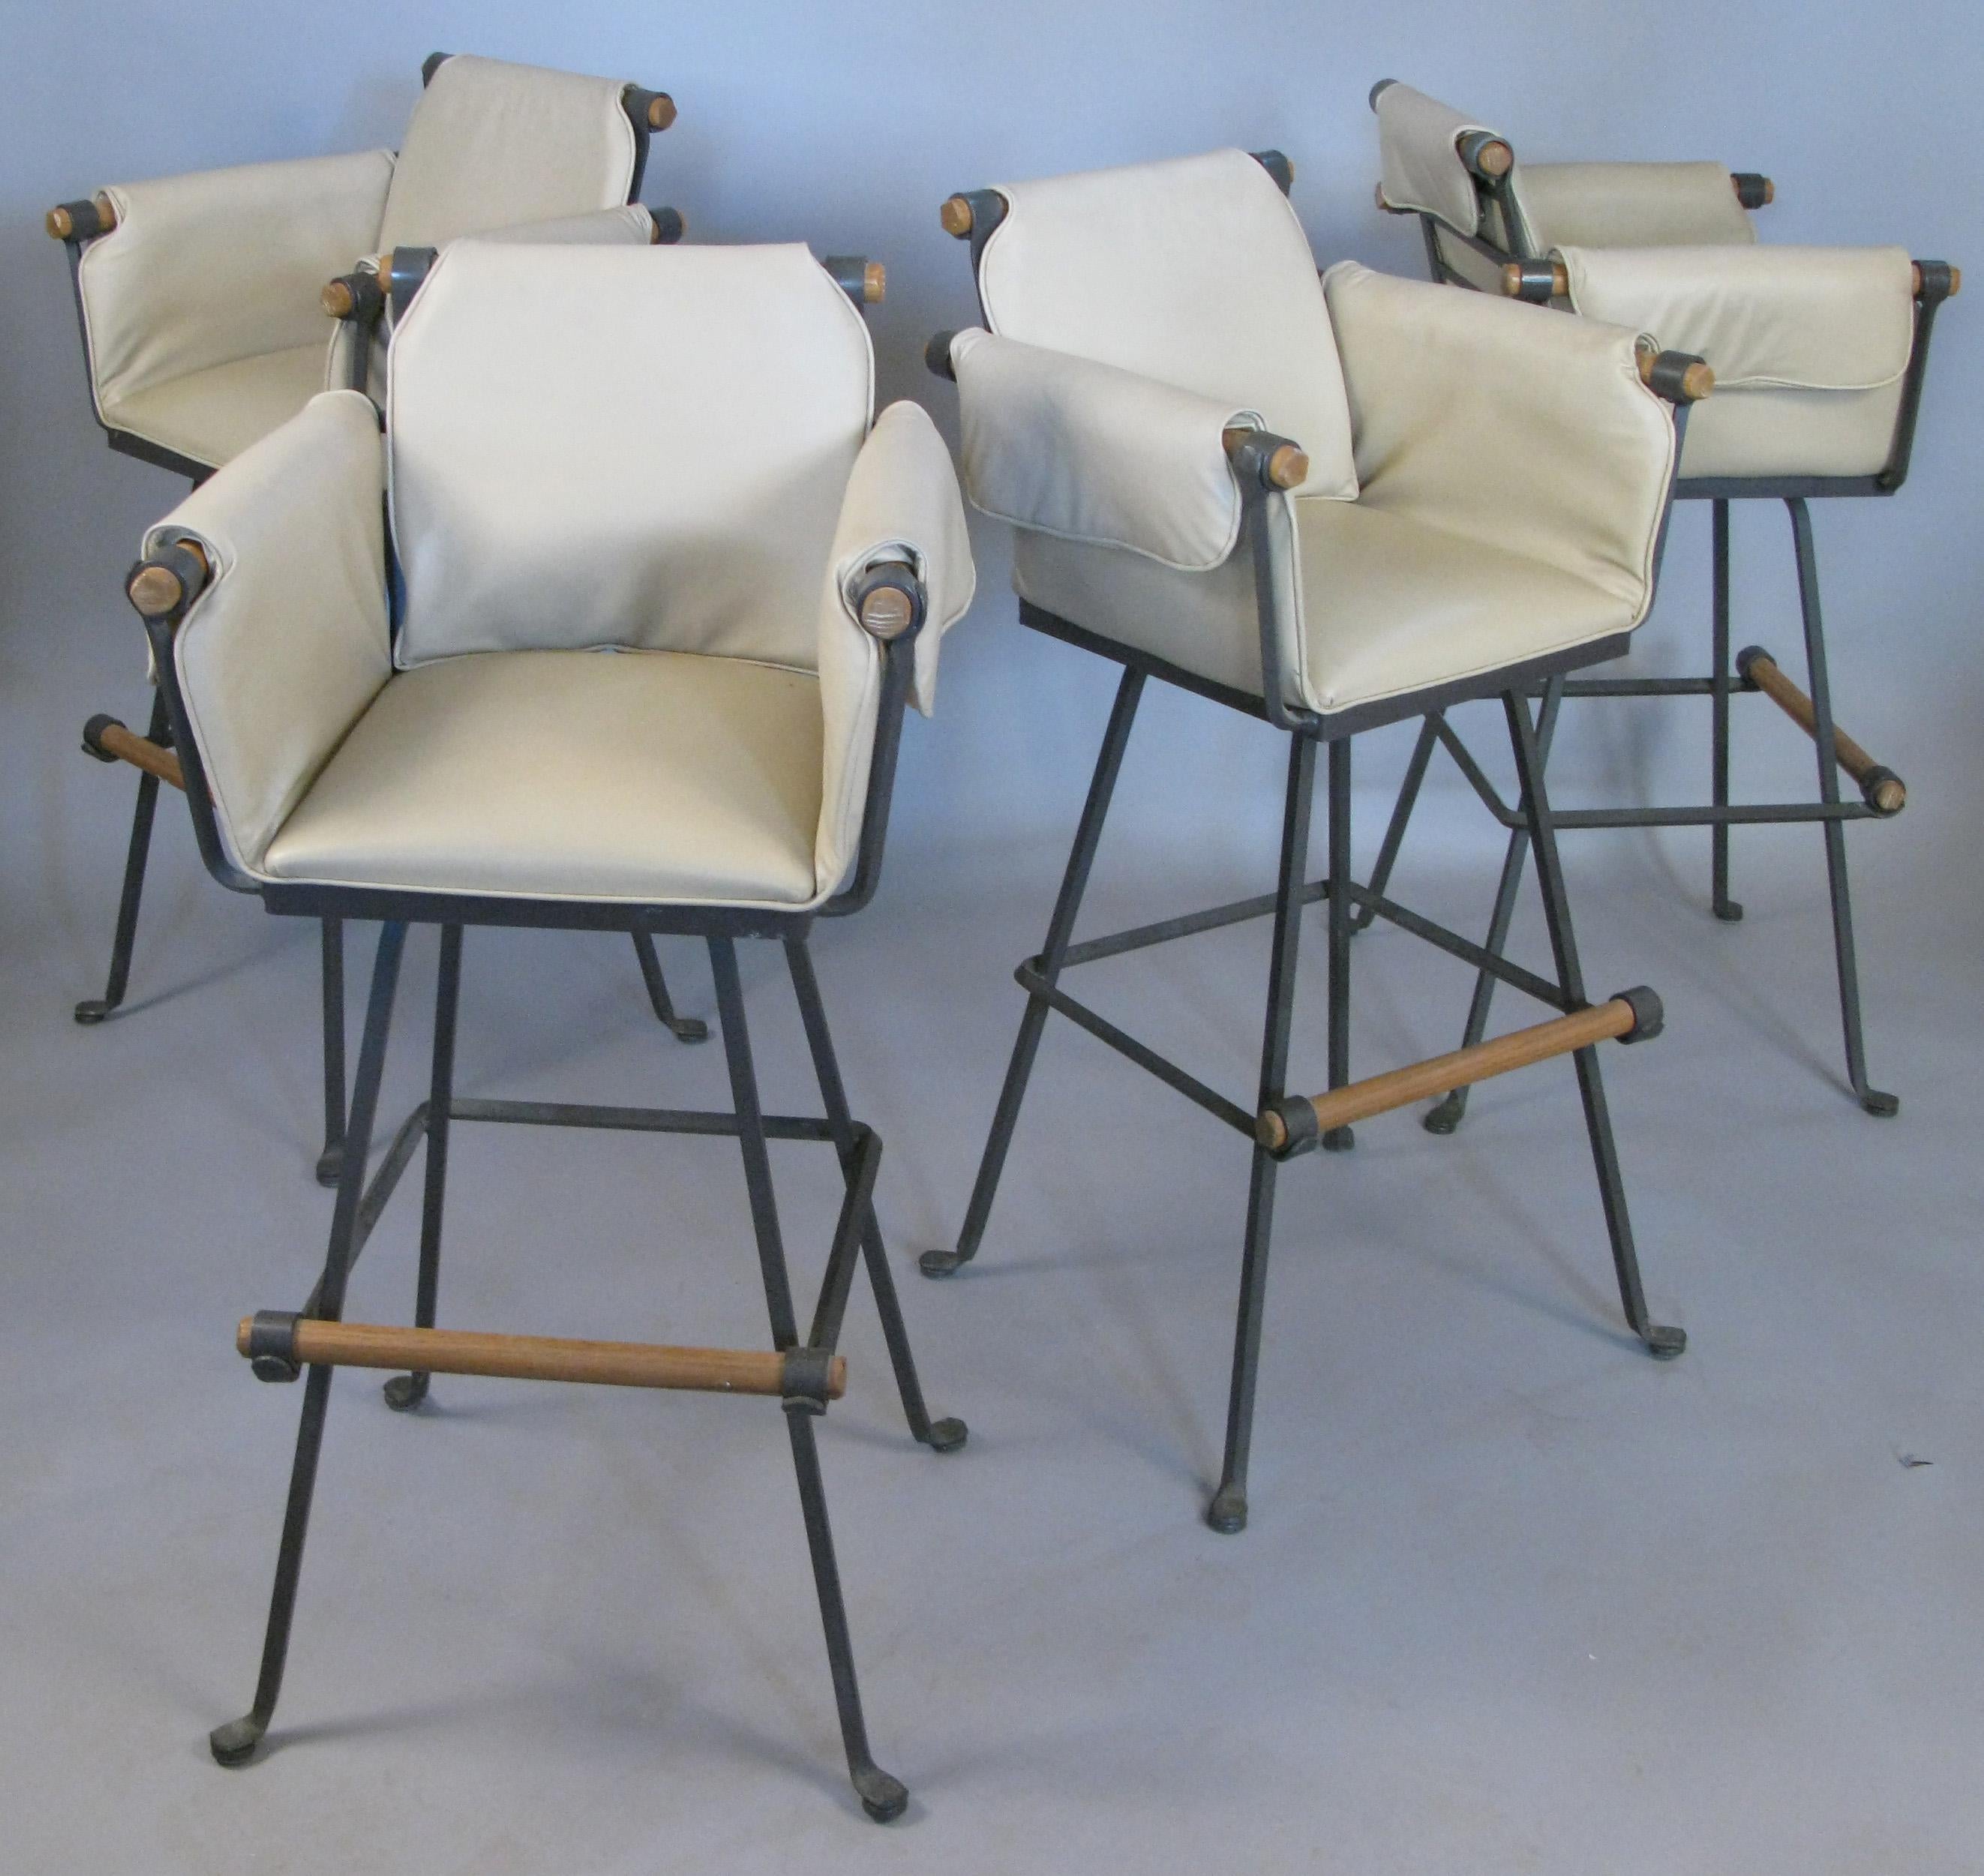 A beautiful set of four vintage 1970s swivel barstools with wrought iron frames and oak arms and footrests. With their original ivory vinyl upholstered seats and arms. Labelled terra furniture. Rare to find in a set this large and in very good